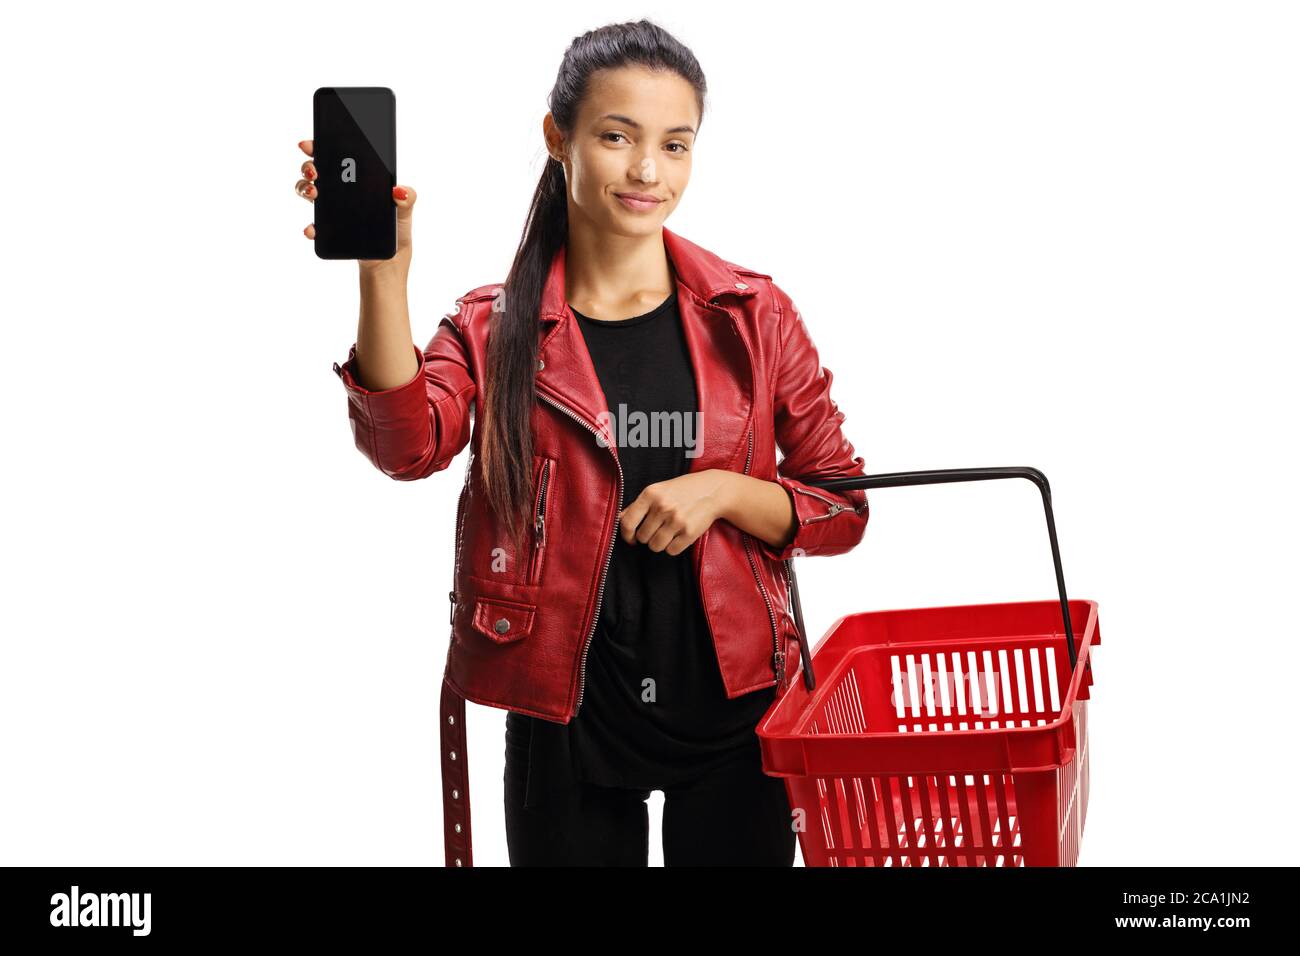 Female customer with a shopping basket showing a smartphone isolated on white background Stock Photo